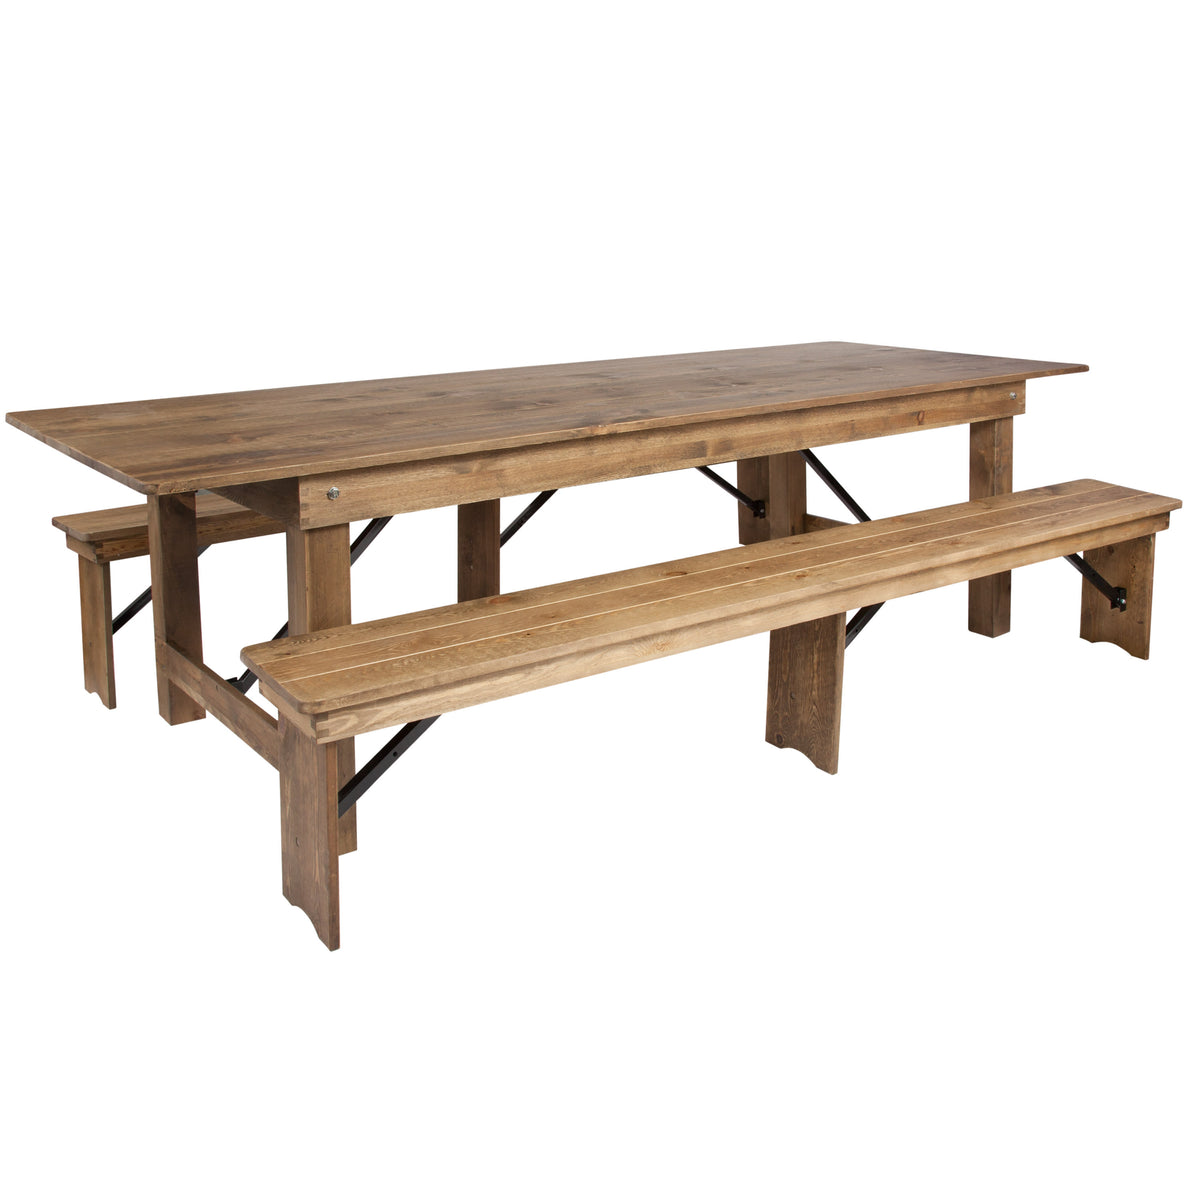 Antique Rustic |#| 9' x 40inch Antique Rustic Folding Farm Table and Two Bench Set